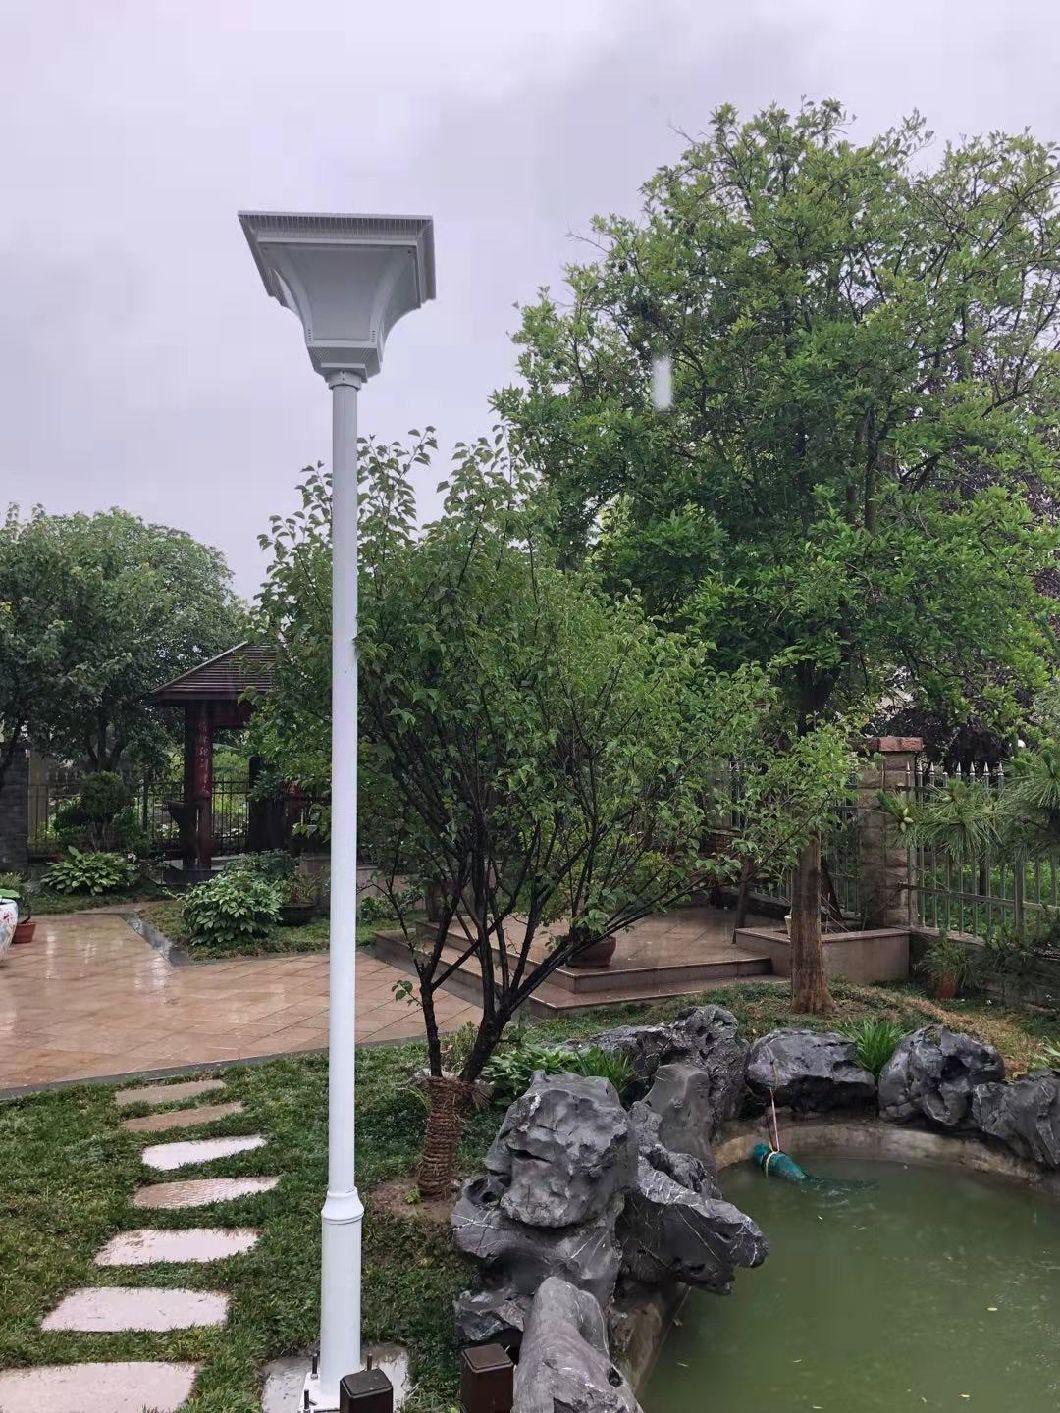 50W Integrated Solar LED Street Light All in One Outdoor Landscape Lamp Lights Lighting Decoration Energy Saving Power System Home Lamps Bulb Products Lightings